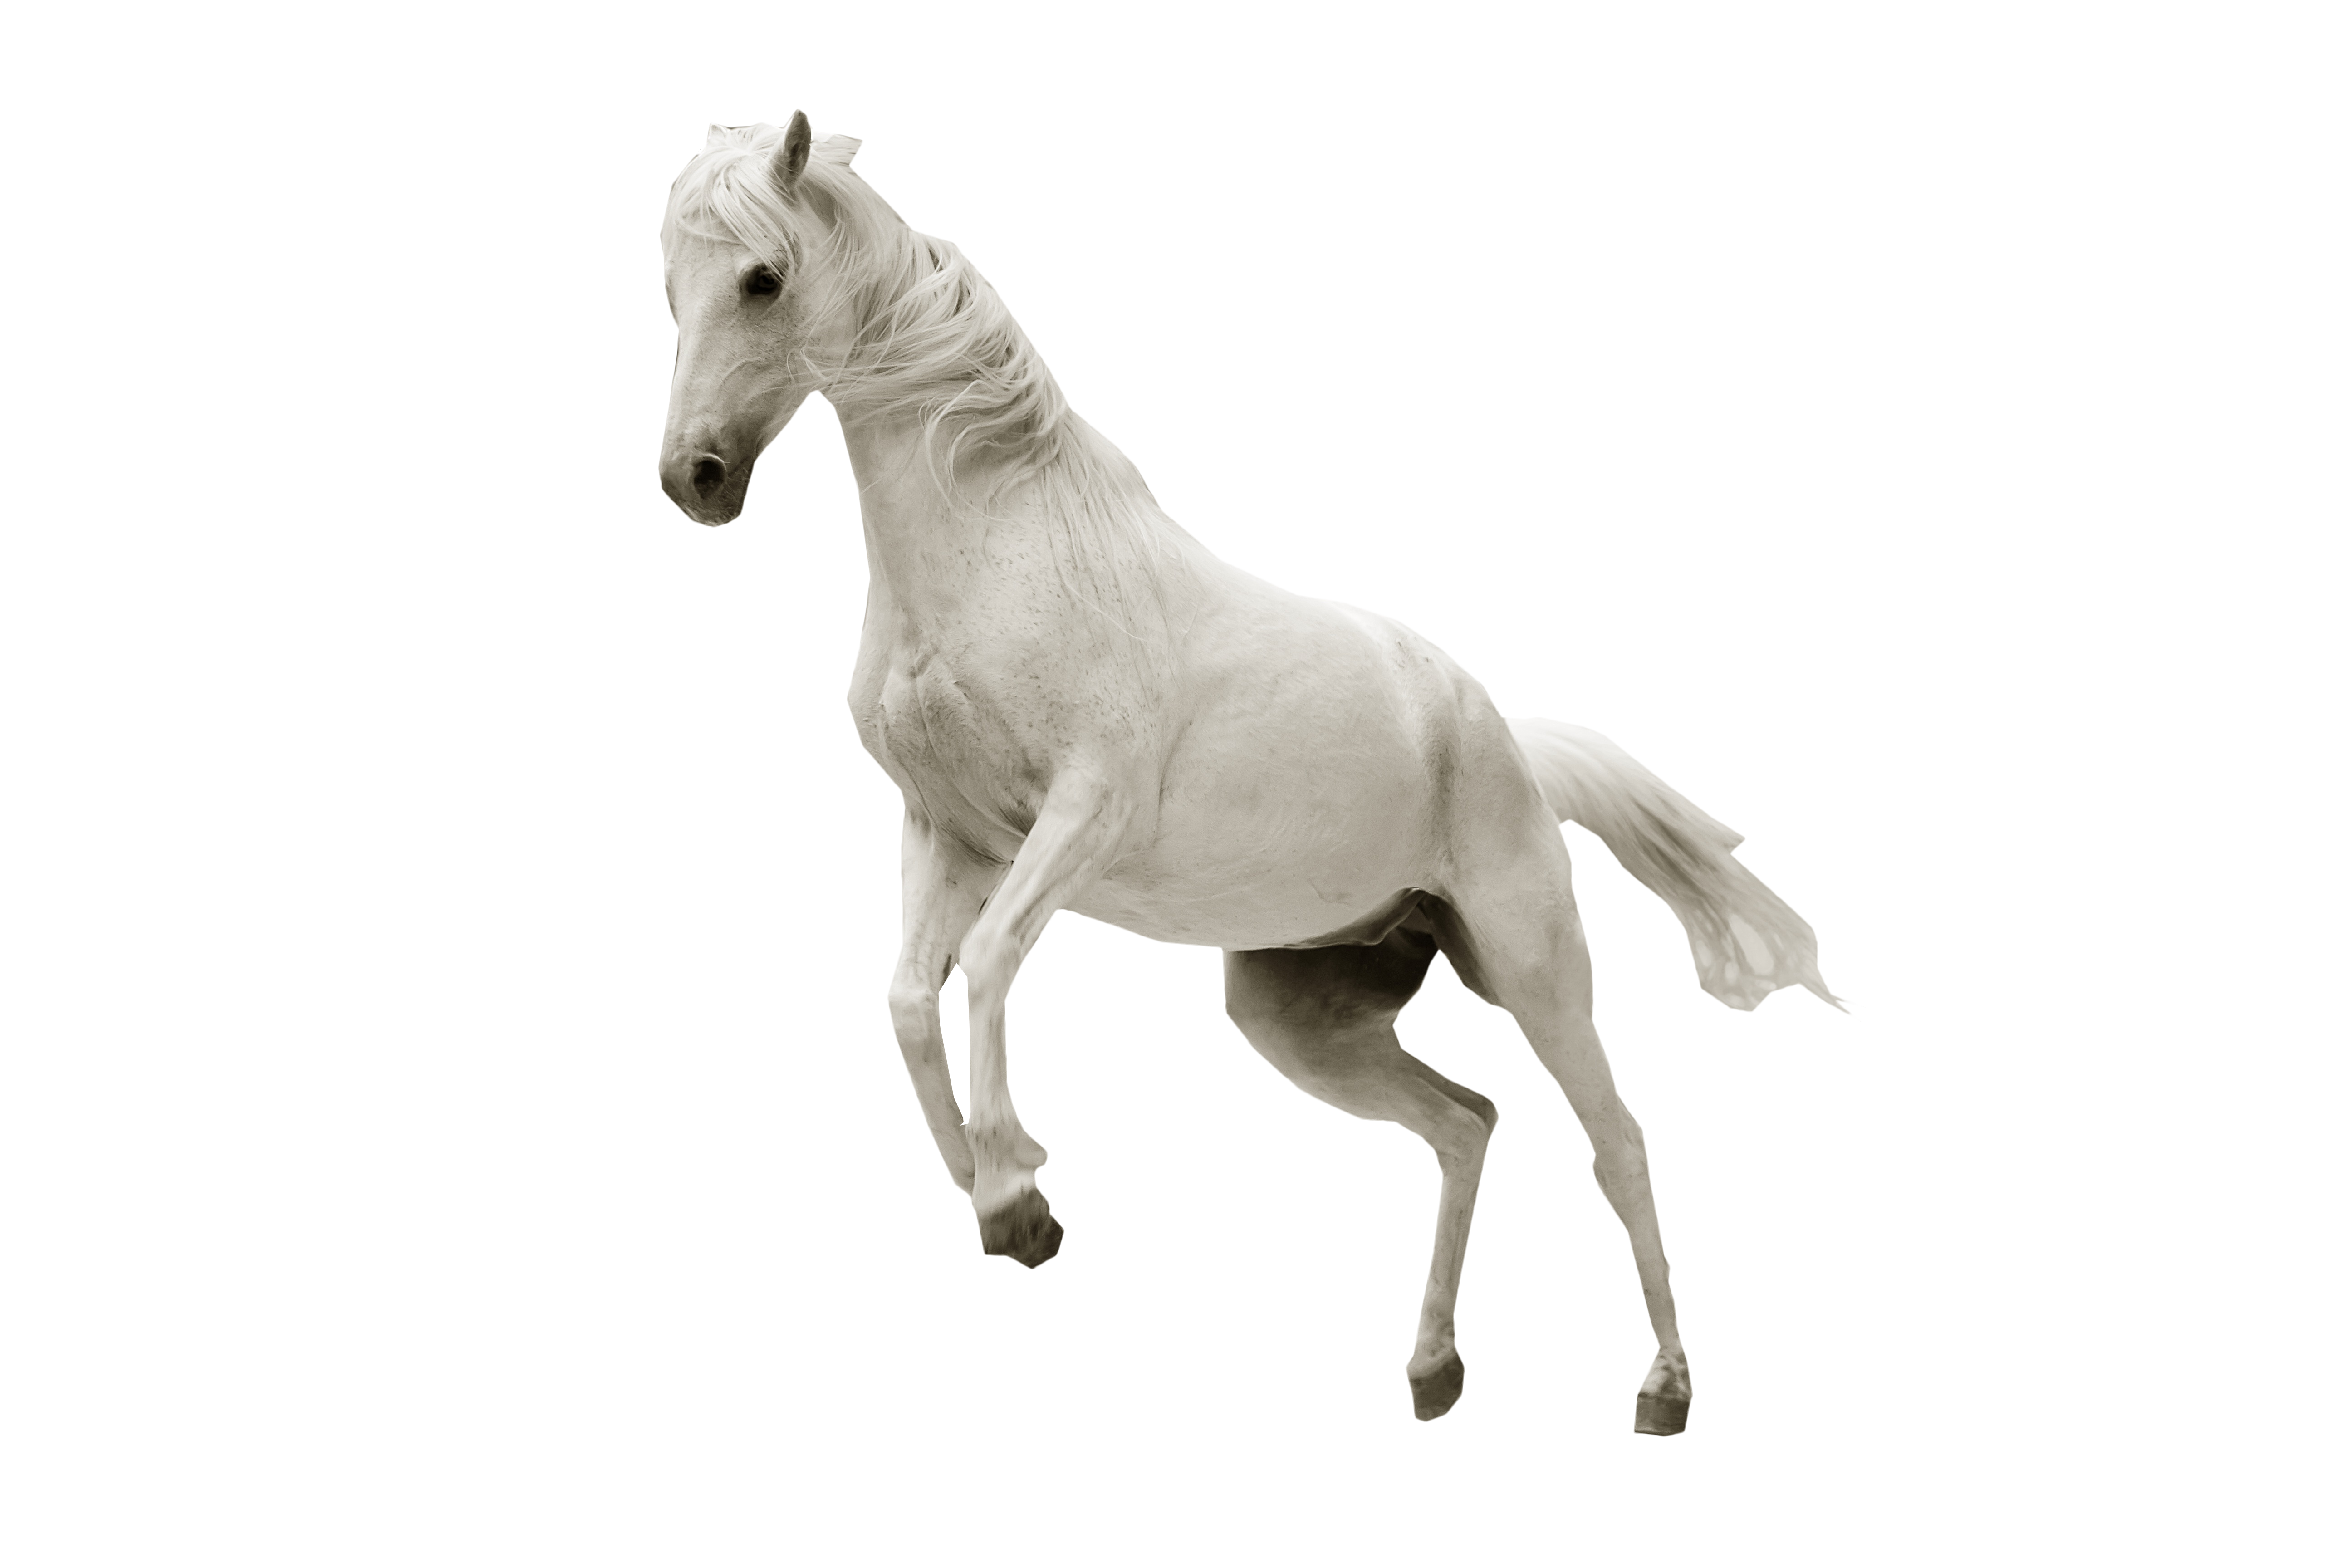 White Horse Jumping PNG Image - PurePNG | Free transparent CC0 PNG ...